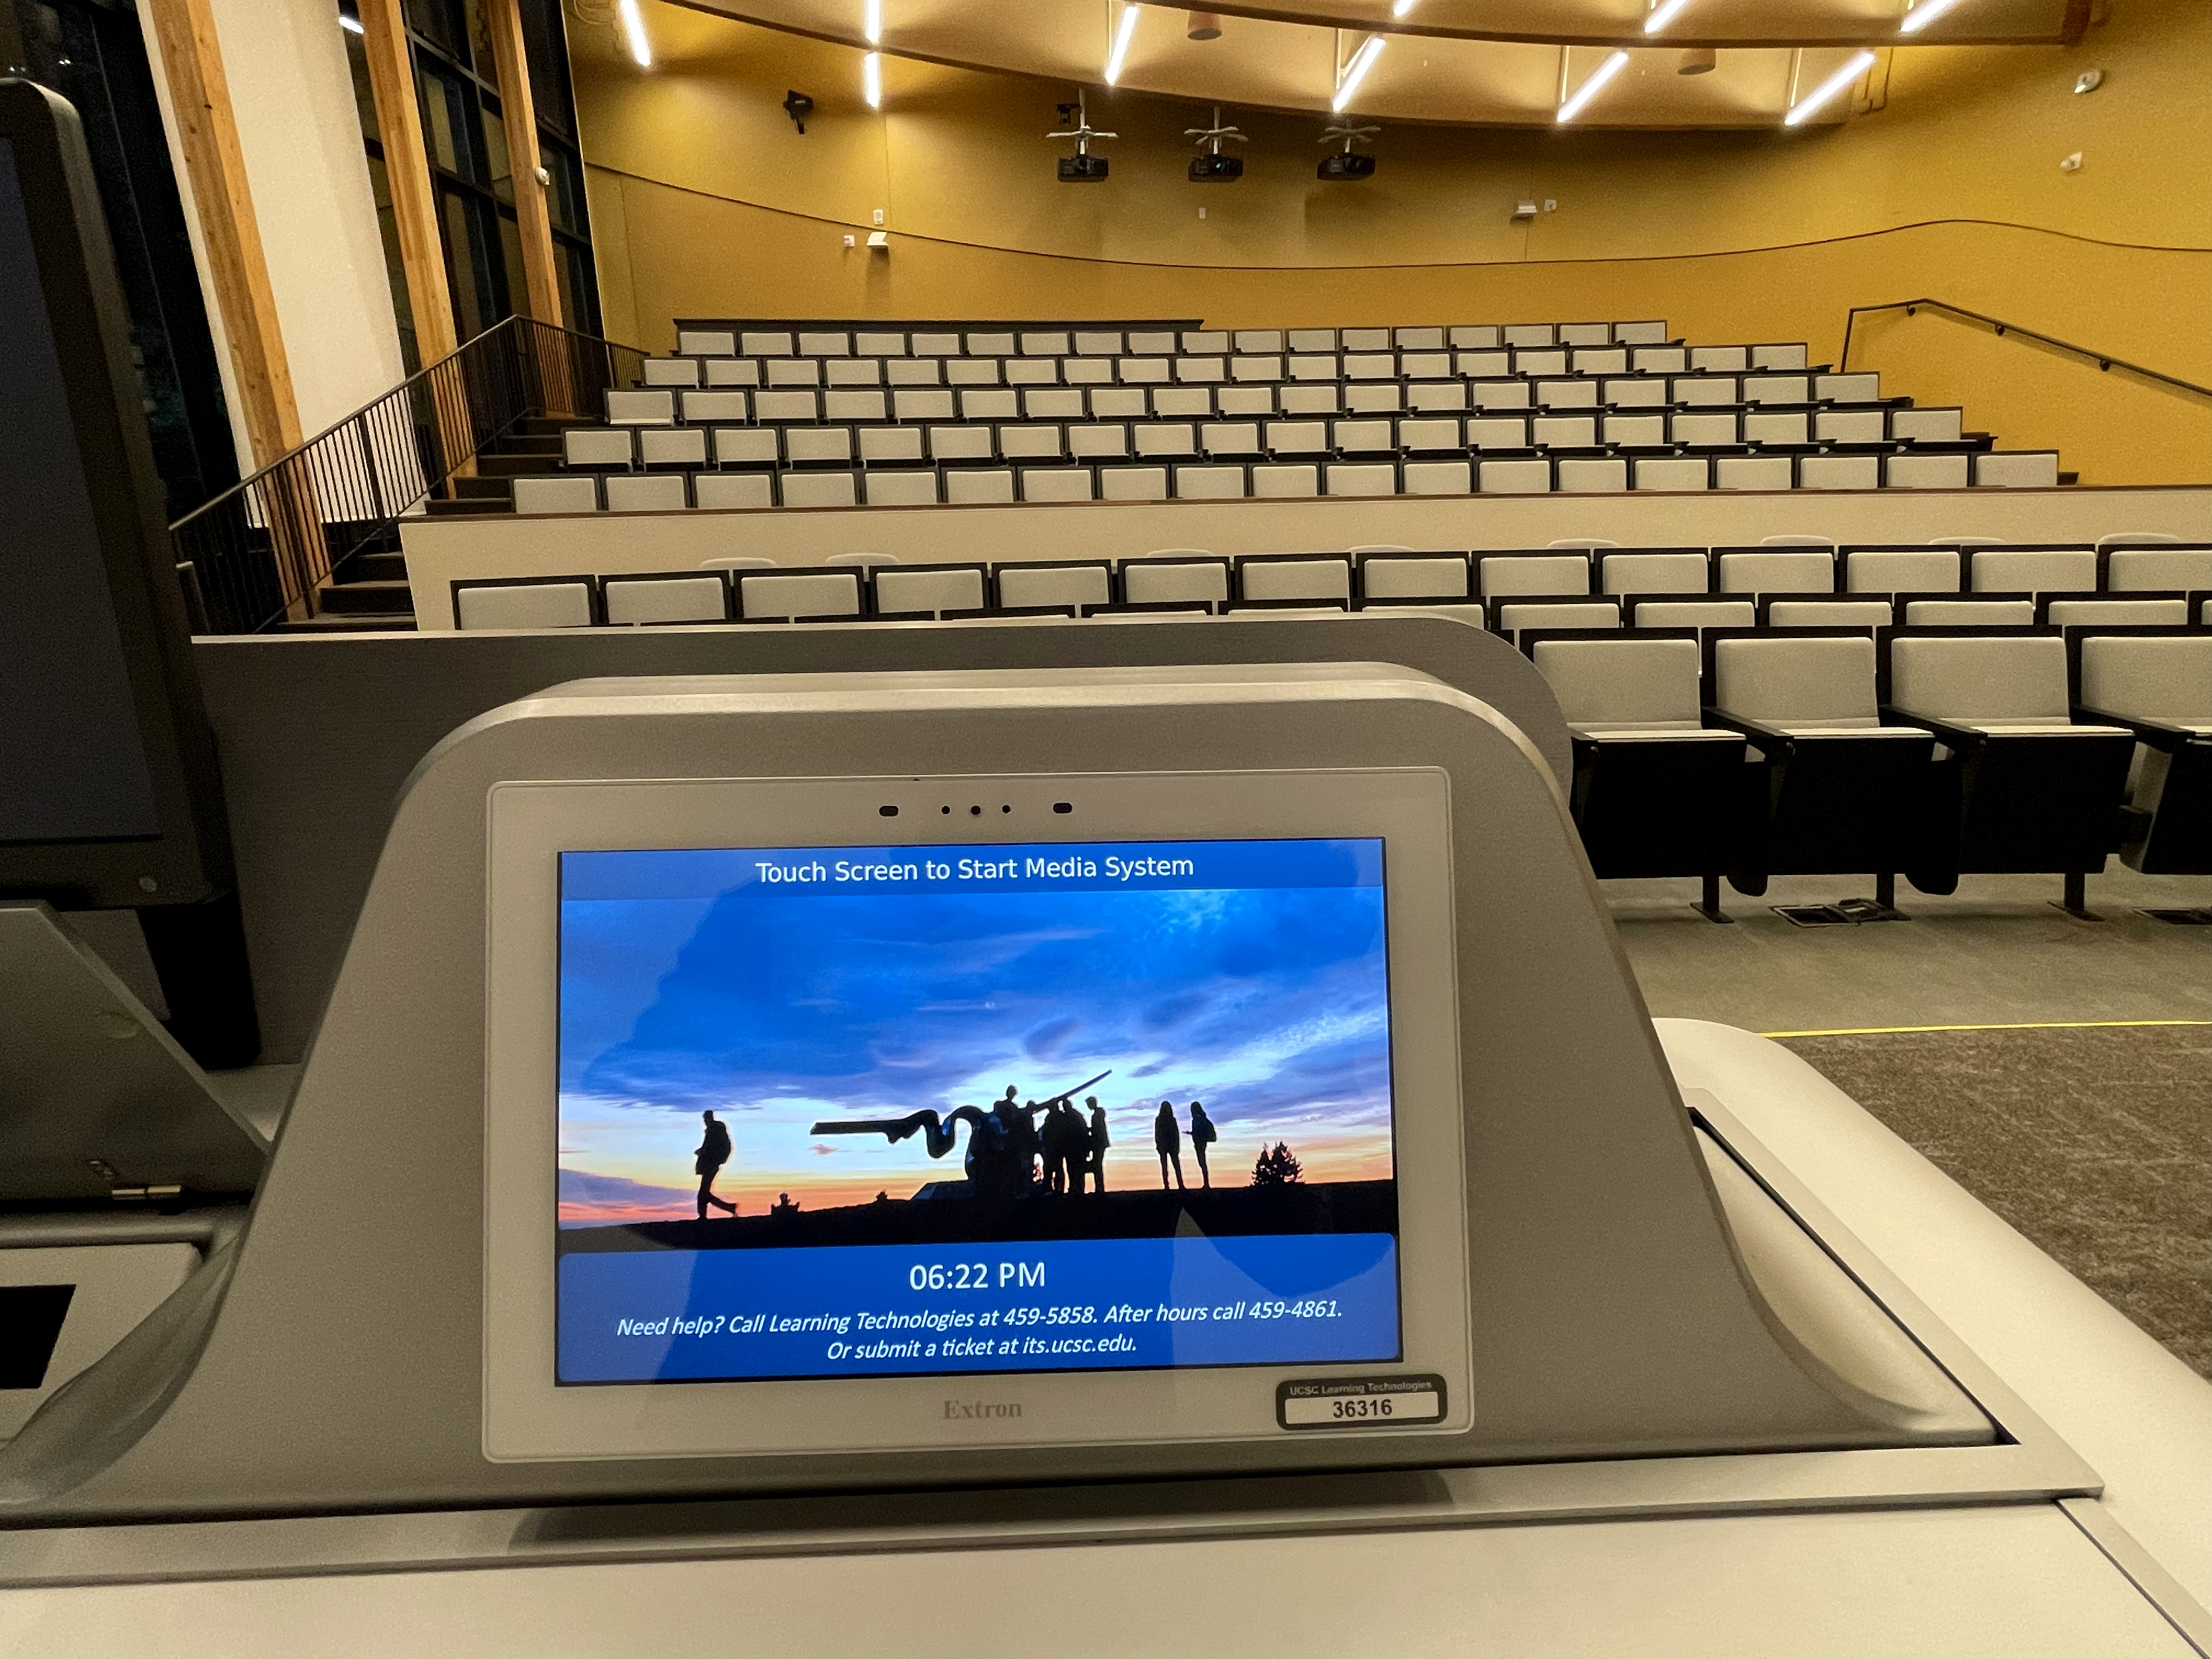 Image of the Instructor's view of the media panel in Kresge 3201